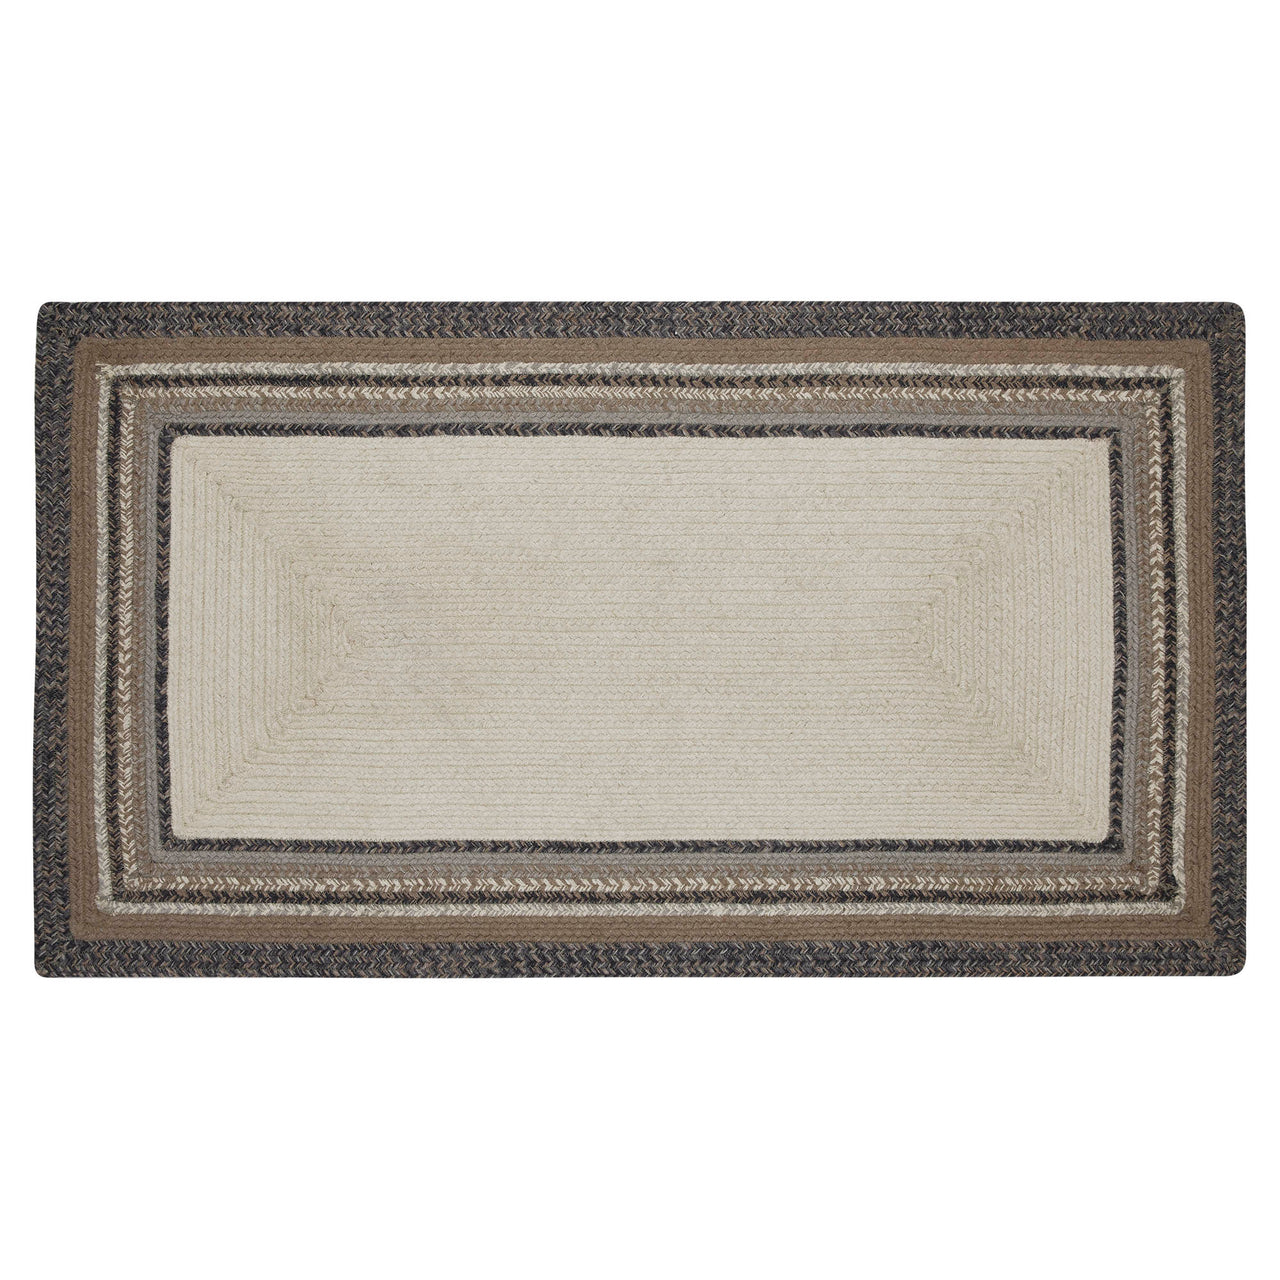 Floral Vine Jute Braided Rug Rect. with Rug Pad 27"x48" VHC Brands